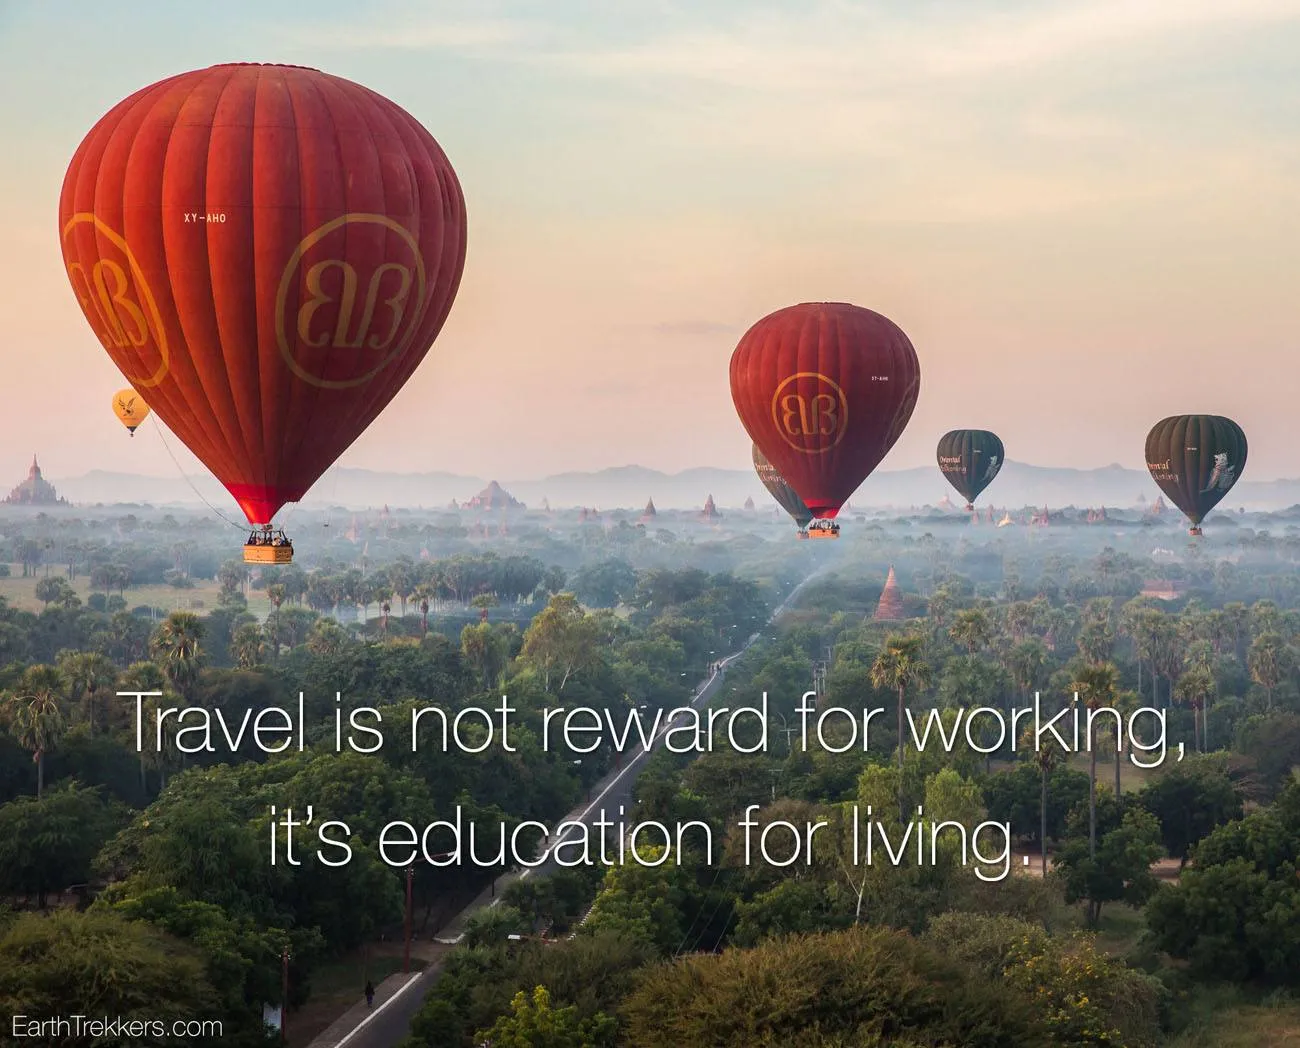 Travel is education for living